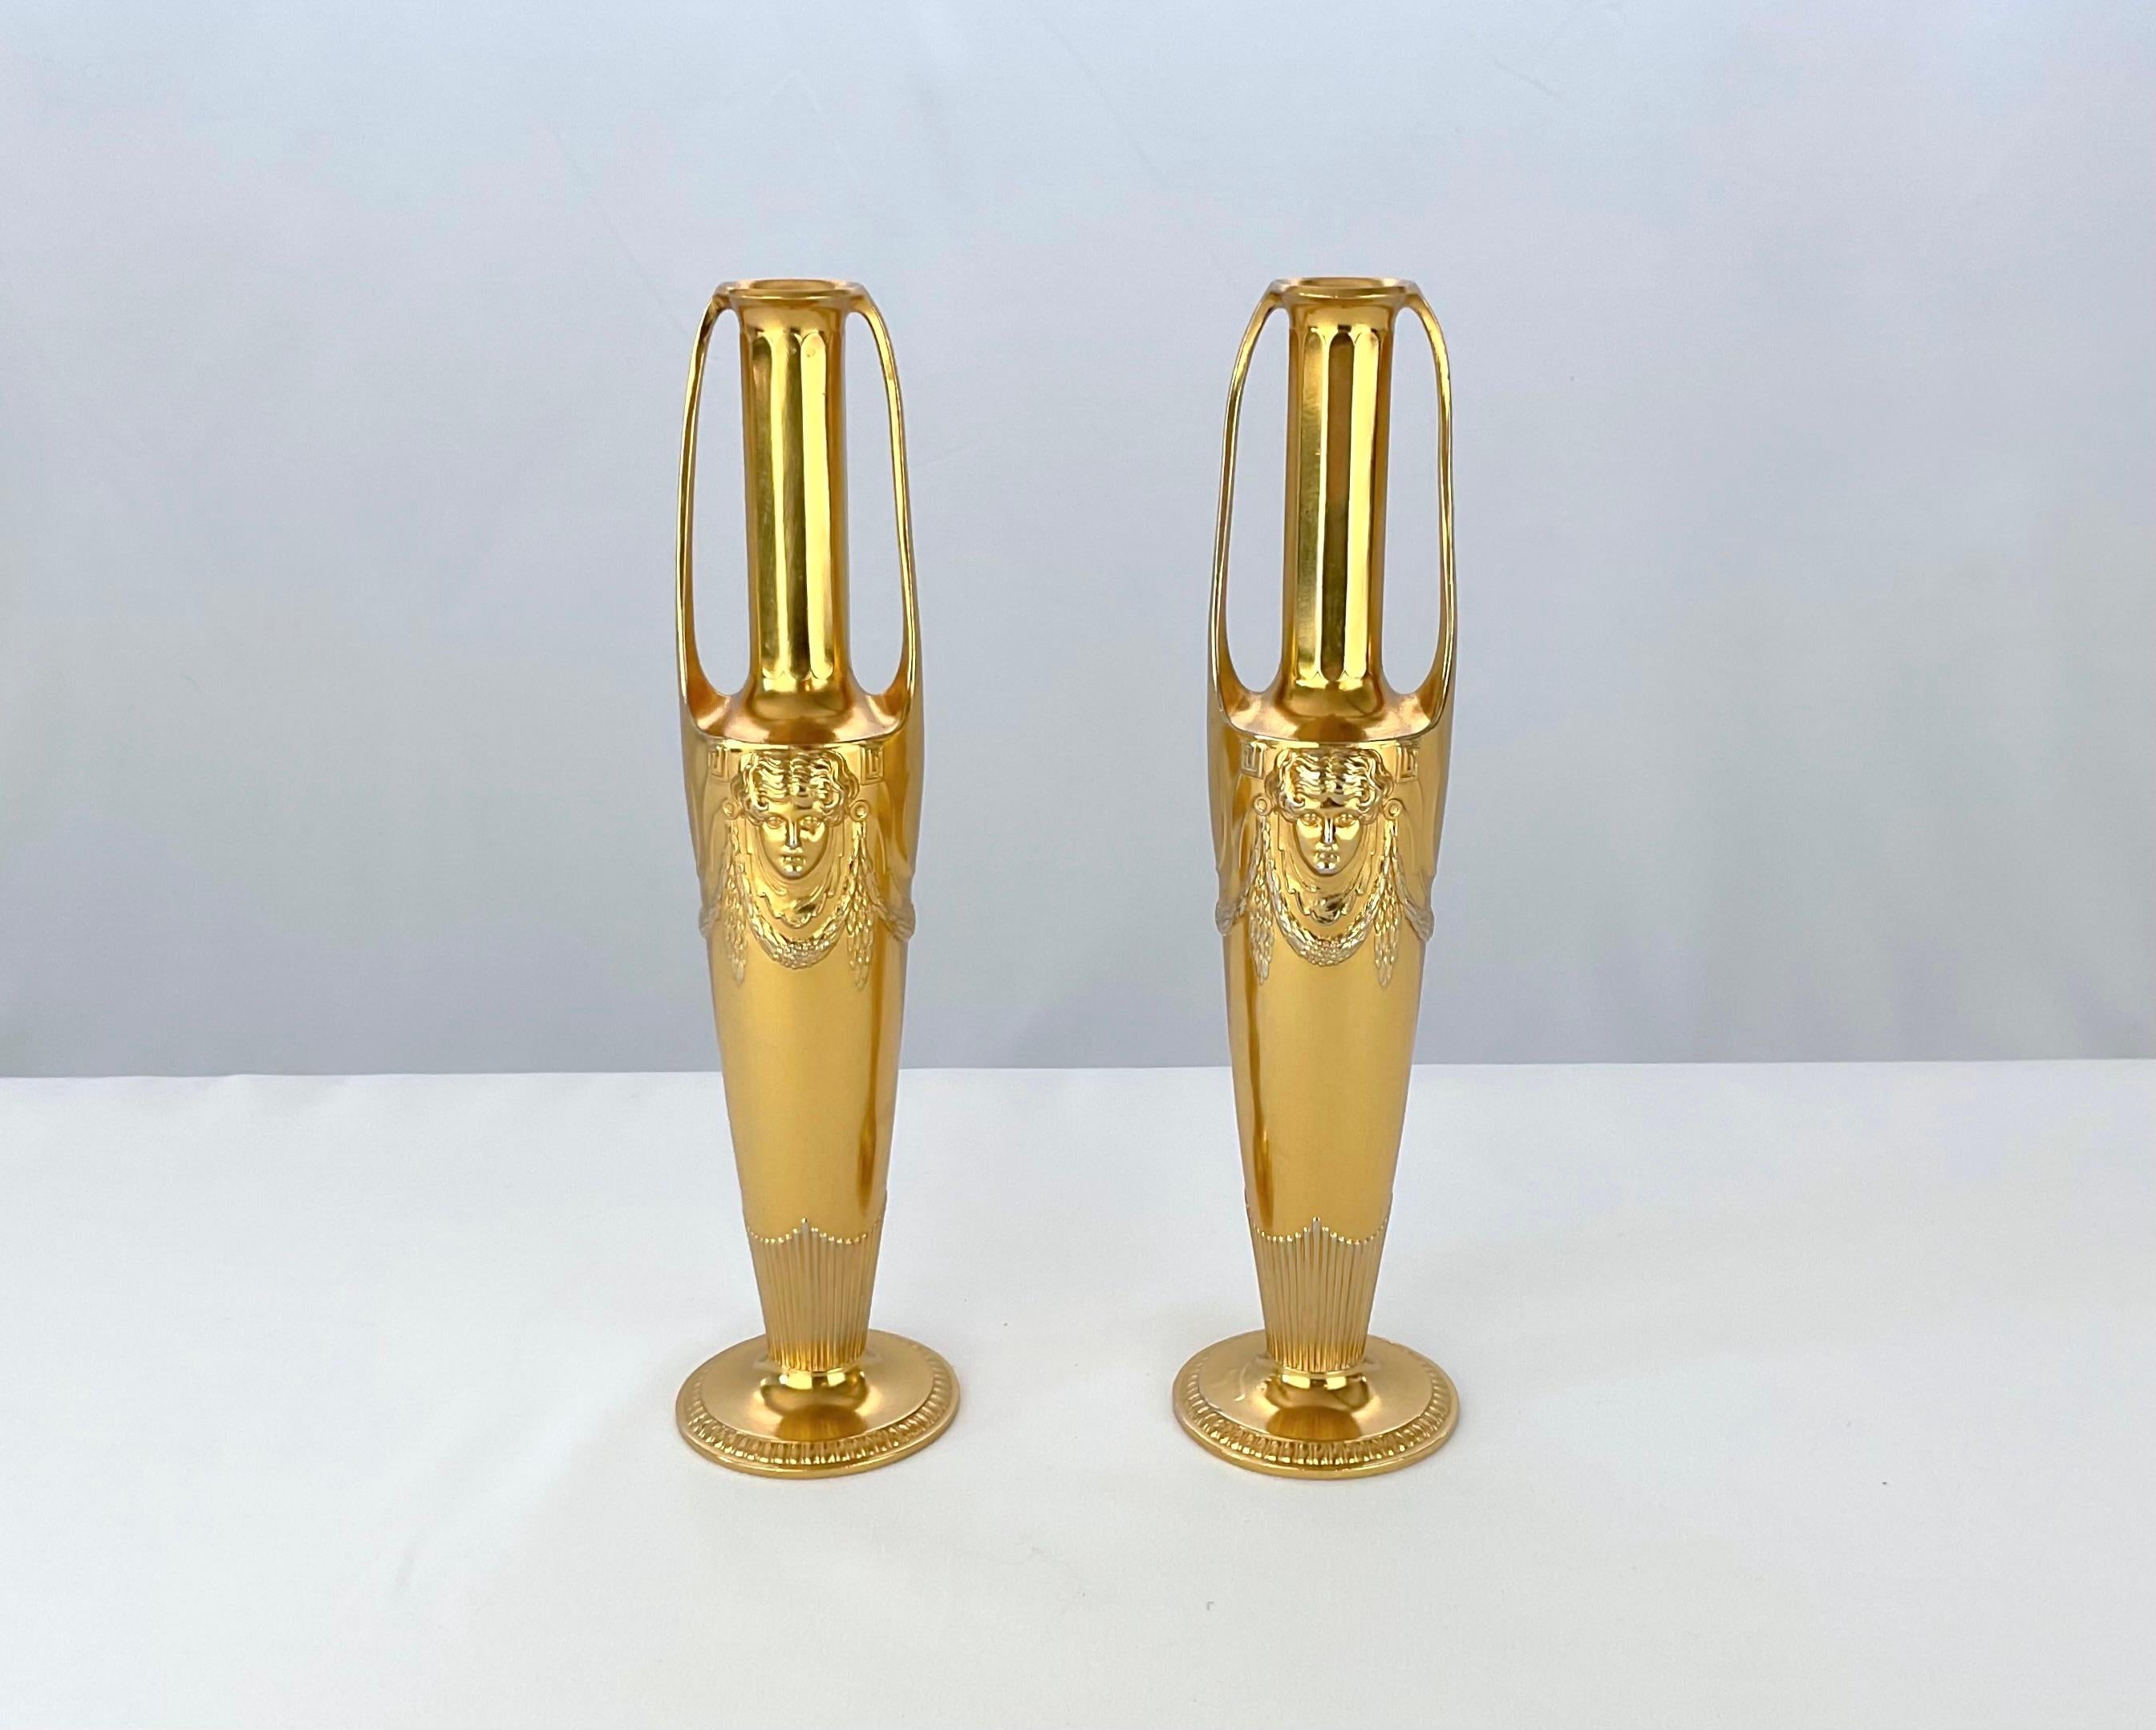 An antique two-handled gilt metal vase pair in the neoclassical style by Orivit-Metallwarenfabrik AG of Germany, dating to the Art Nouveau / Jugendstil period, circa 1905

The double-handled design resembles a slim and elegant urn. The gilded metal